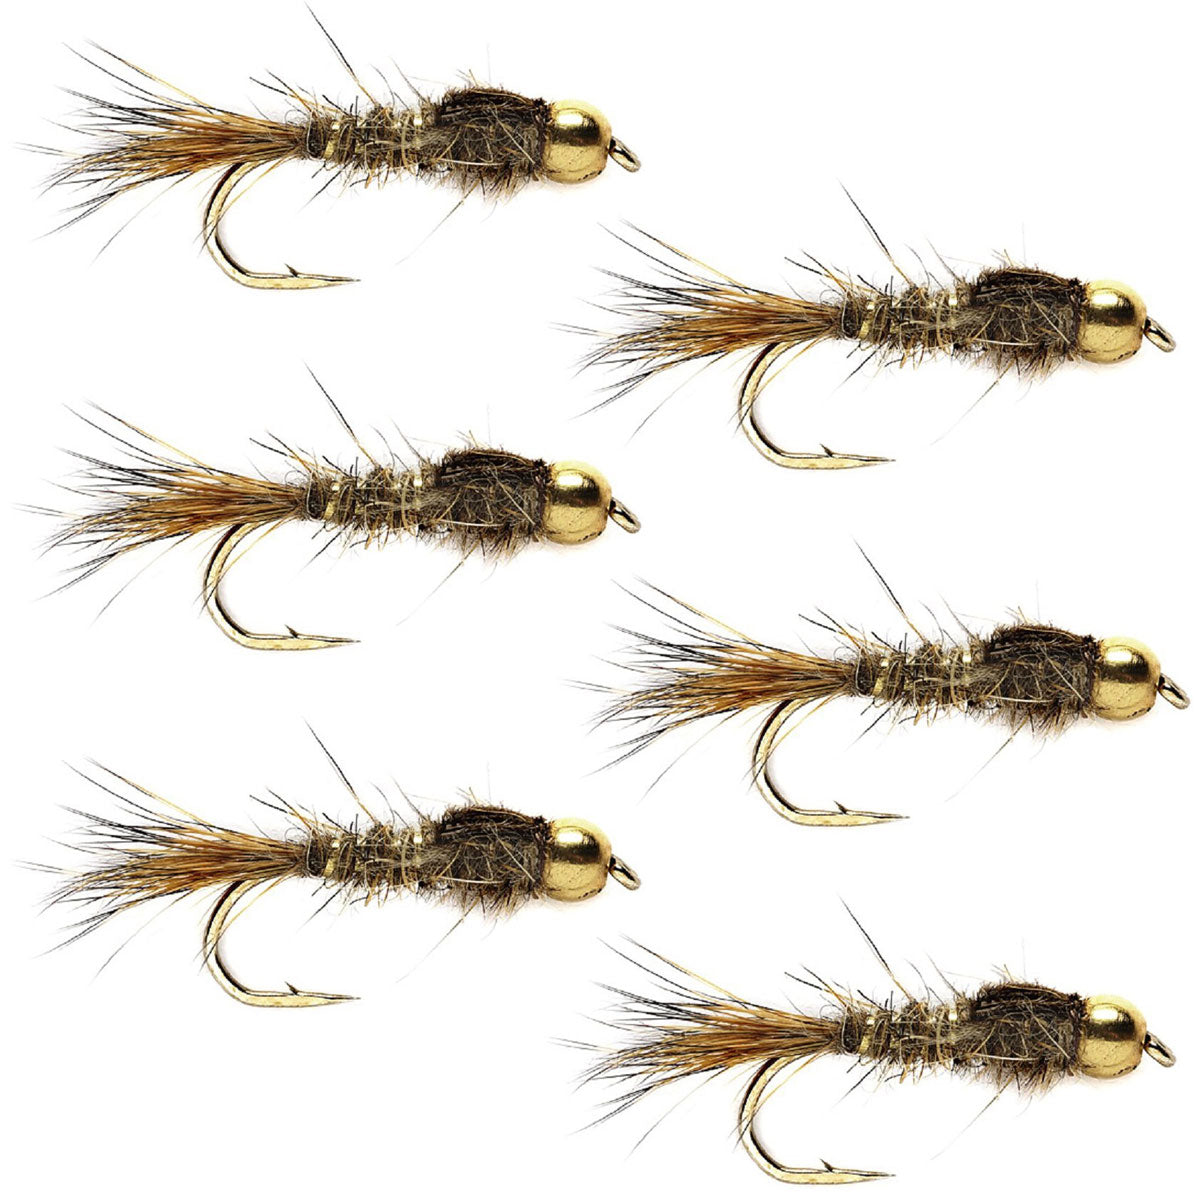 Tungsten Bead Head Gold Ribbed Hare's Ear Trout Fly - Nymph Wet Fly - 6 Flies Hook Size 14